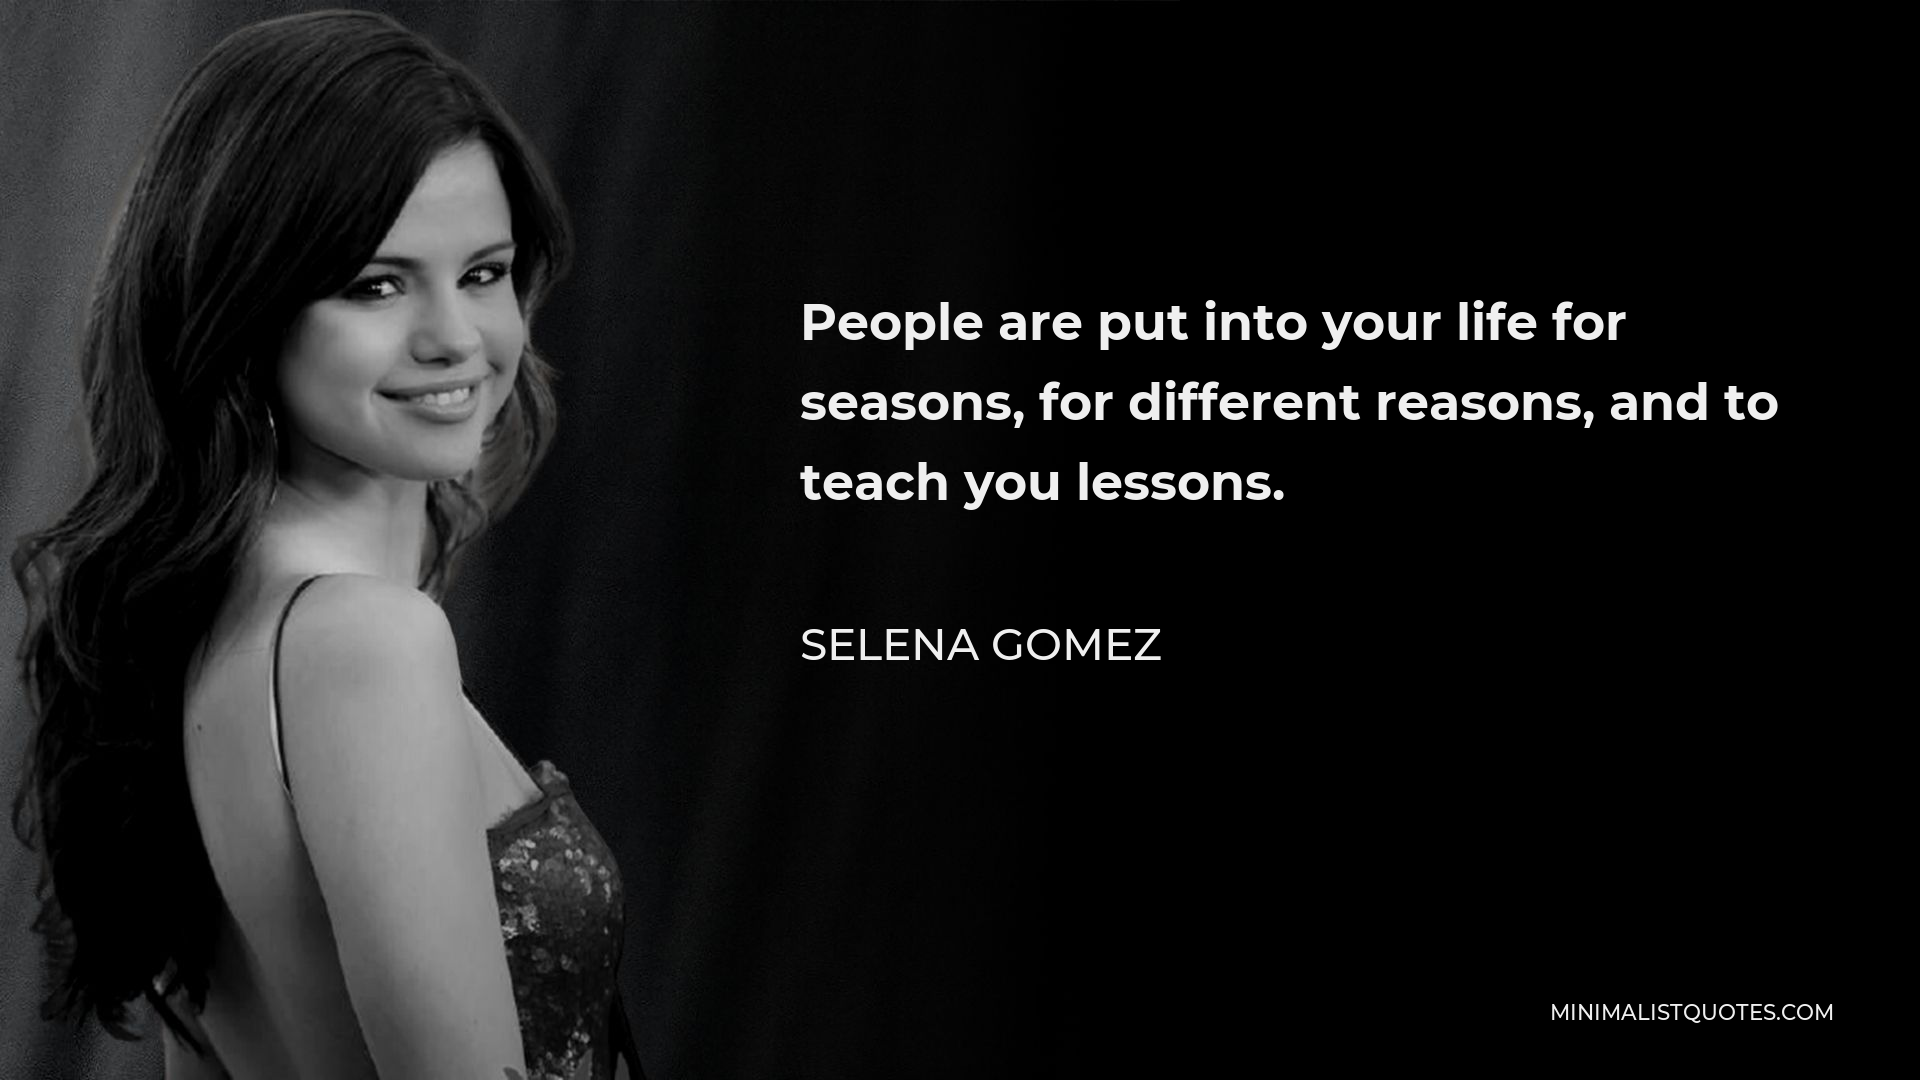 Selena Gomez Quote - People are put into your life for seasons, for different reasons, and to teach you lessons.